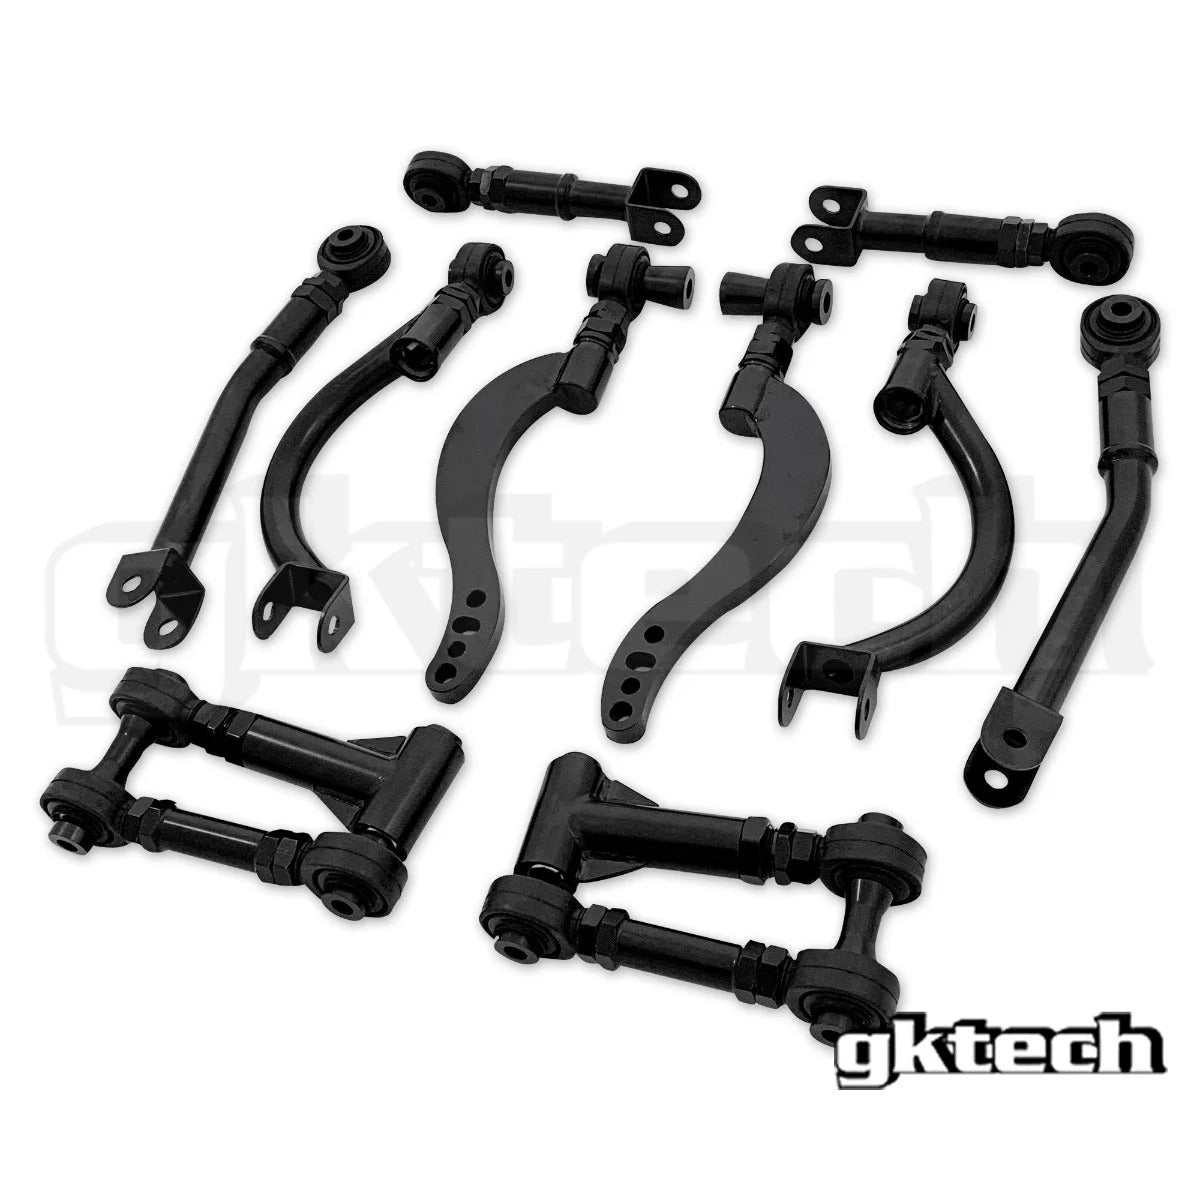 Z32 300ZX Suspension arm package (10% combo discount)